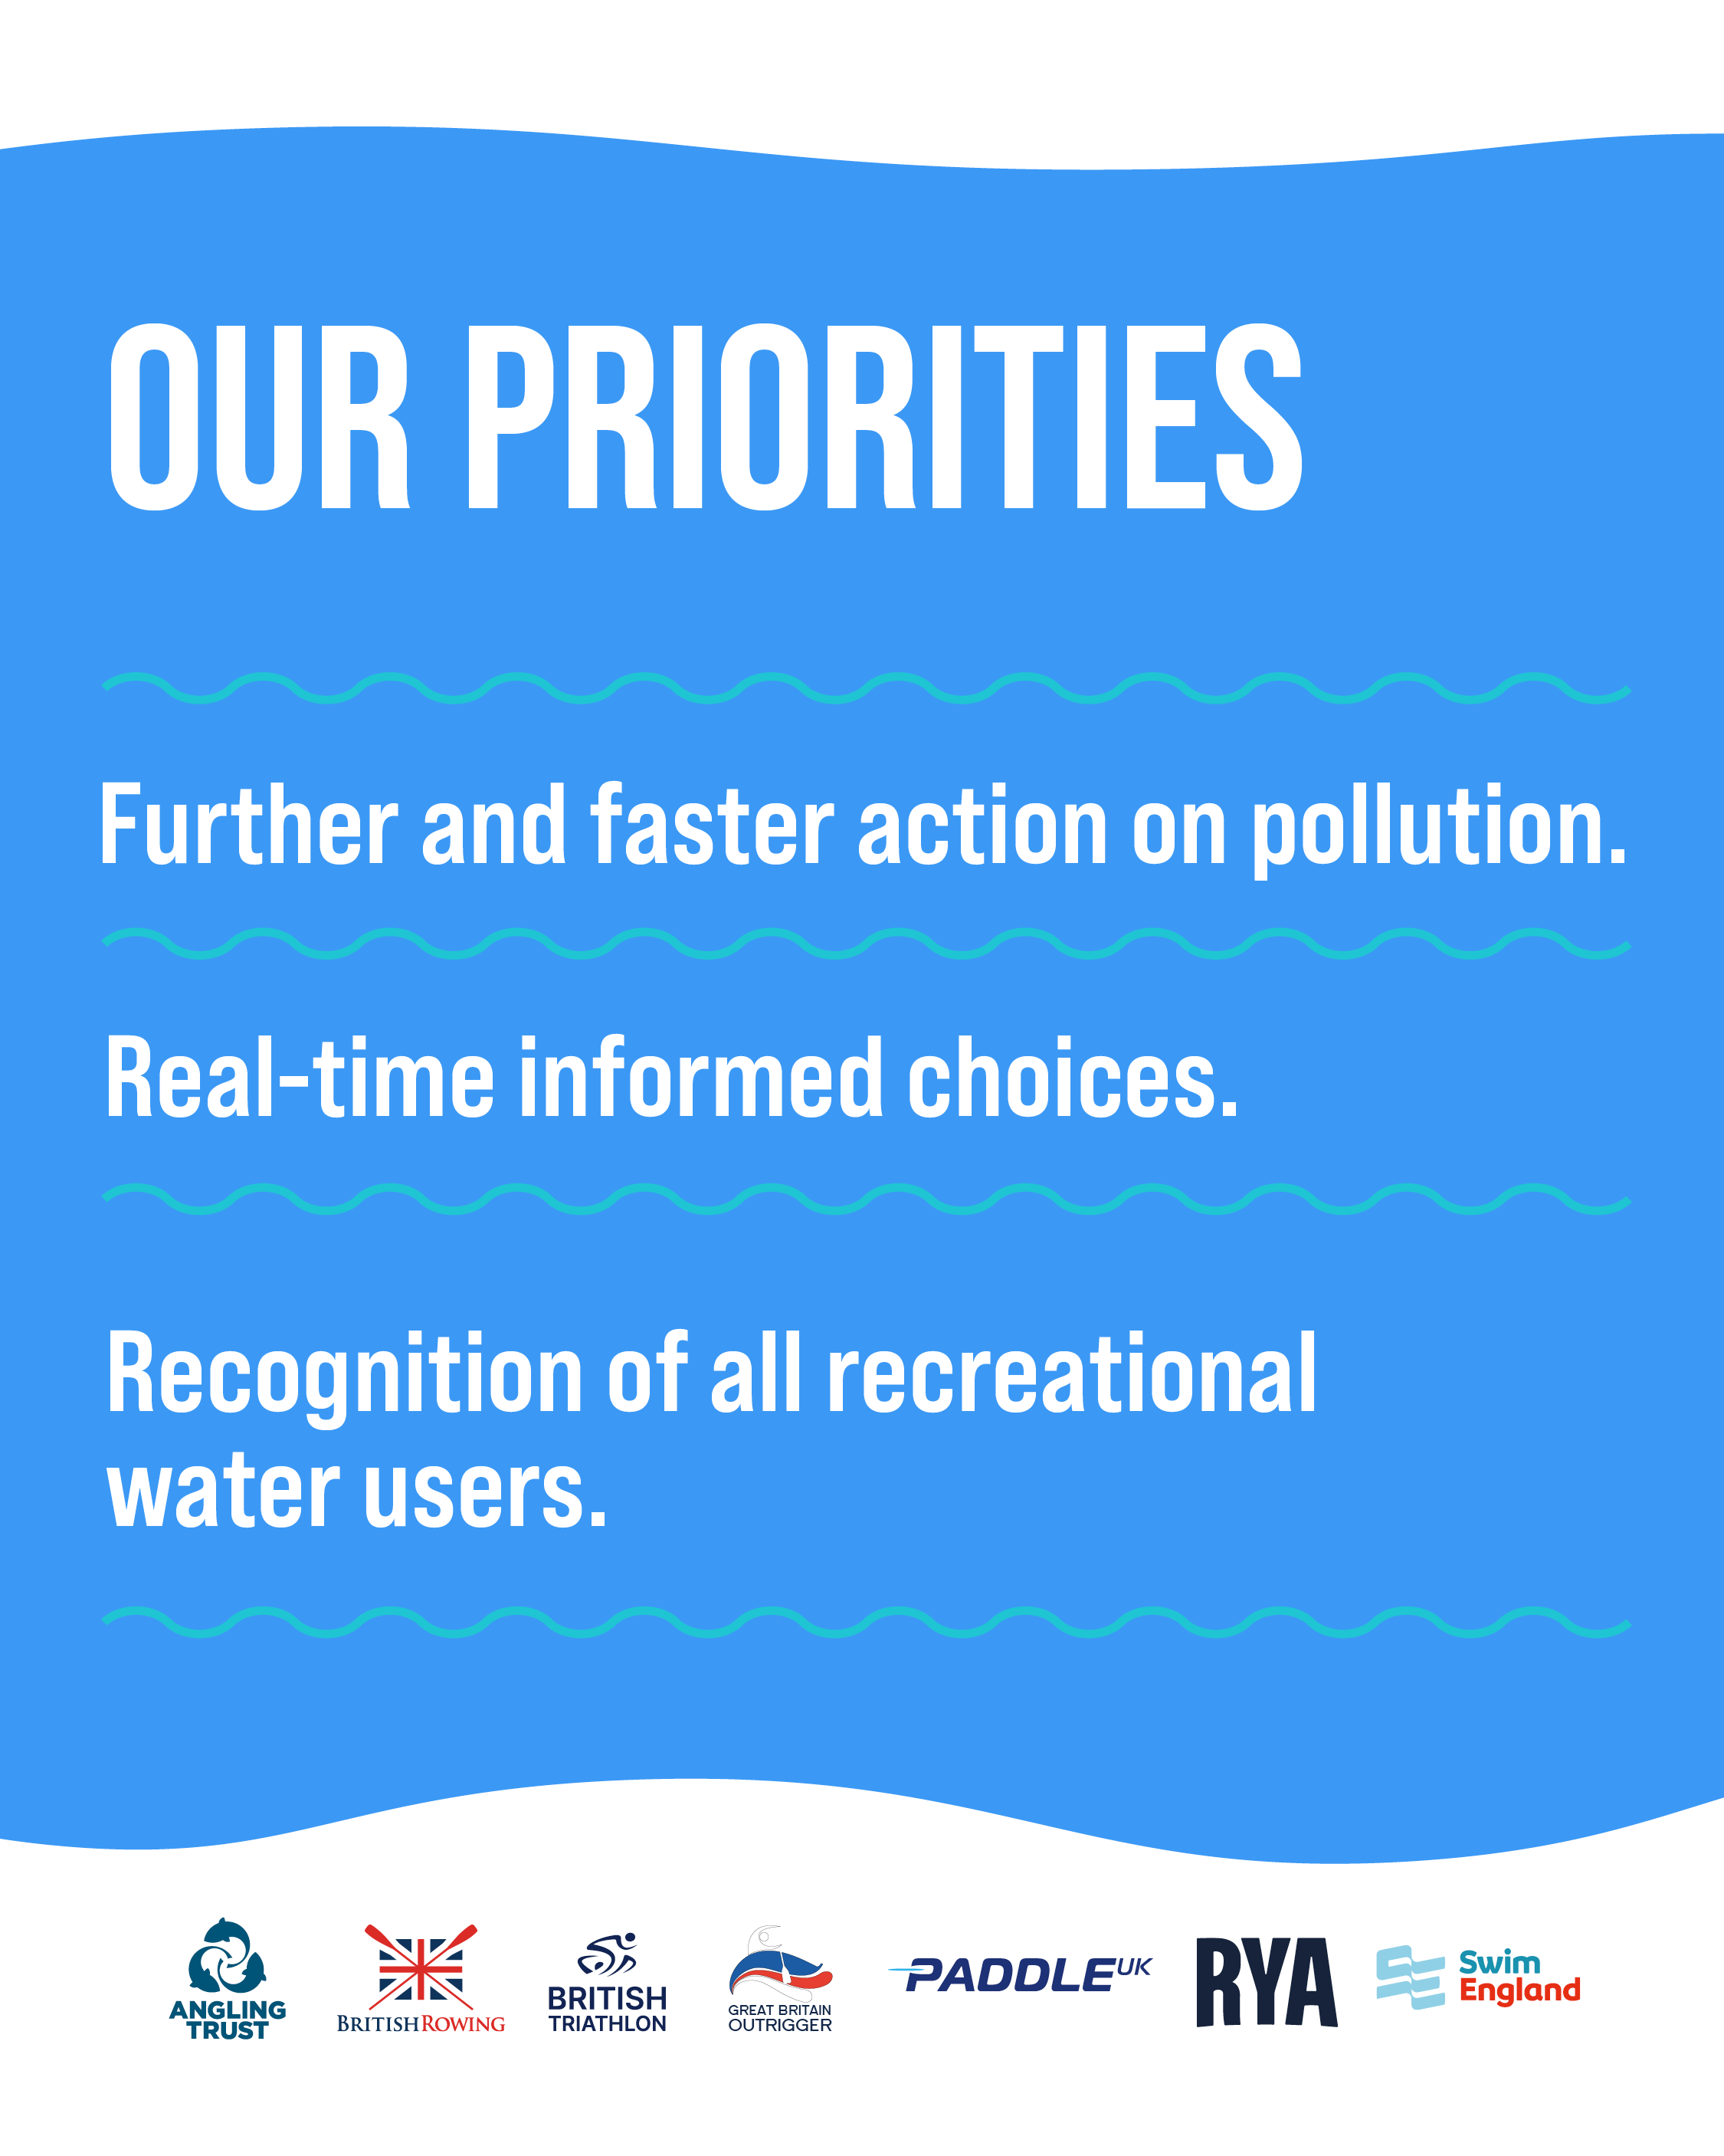 our priorities - further and faster action on pollution, real-time informed choices, recognitions of all recreational water users.